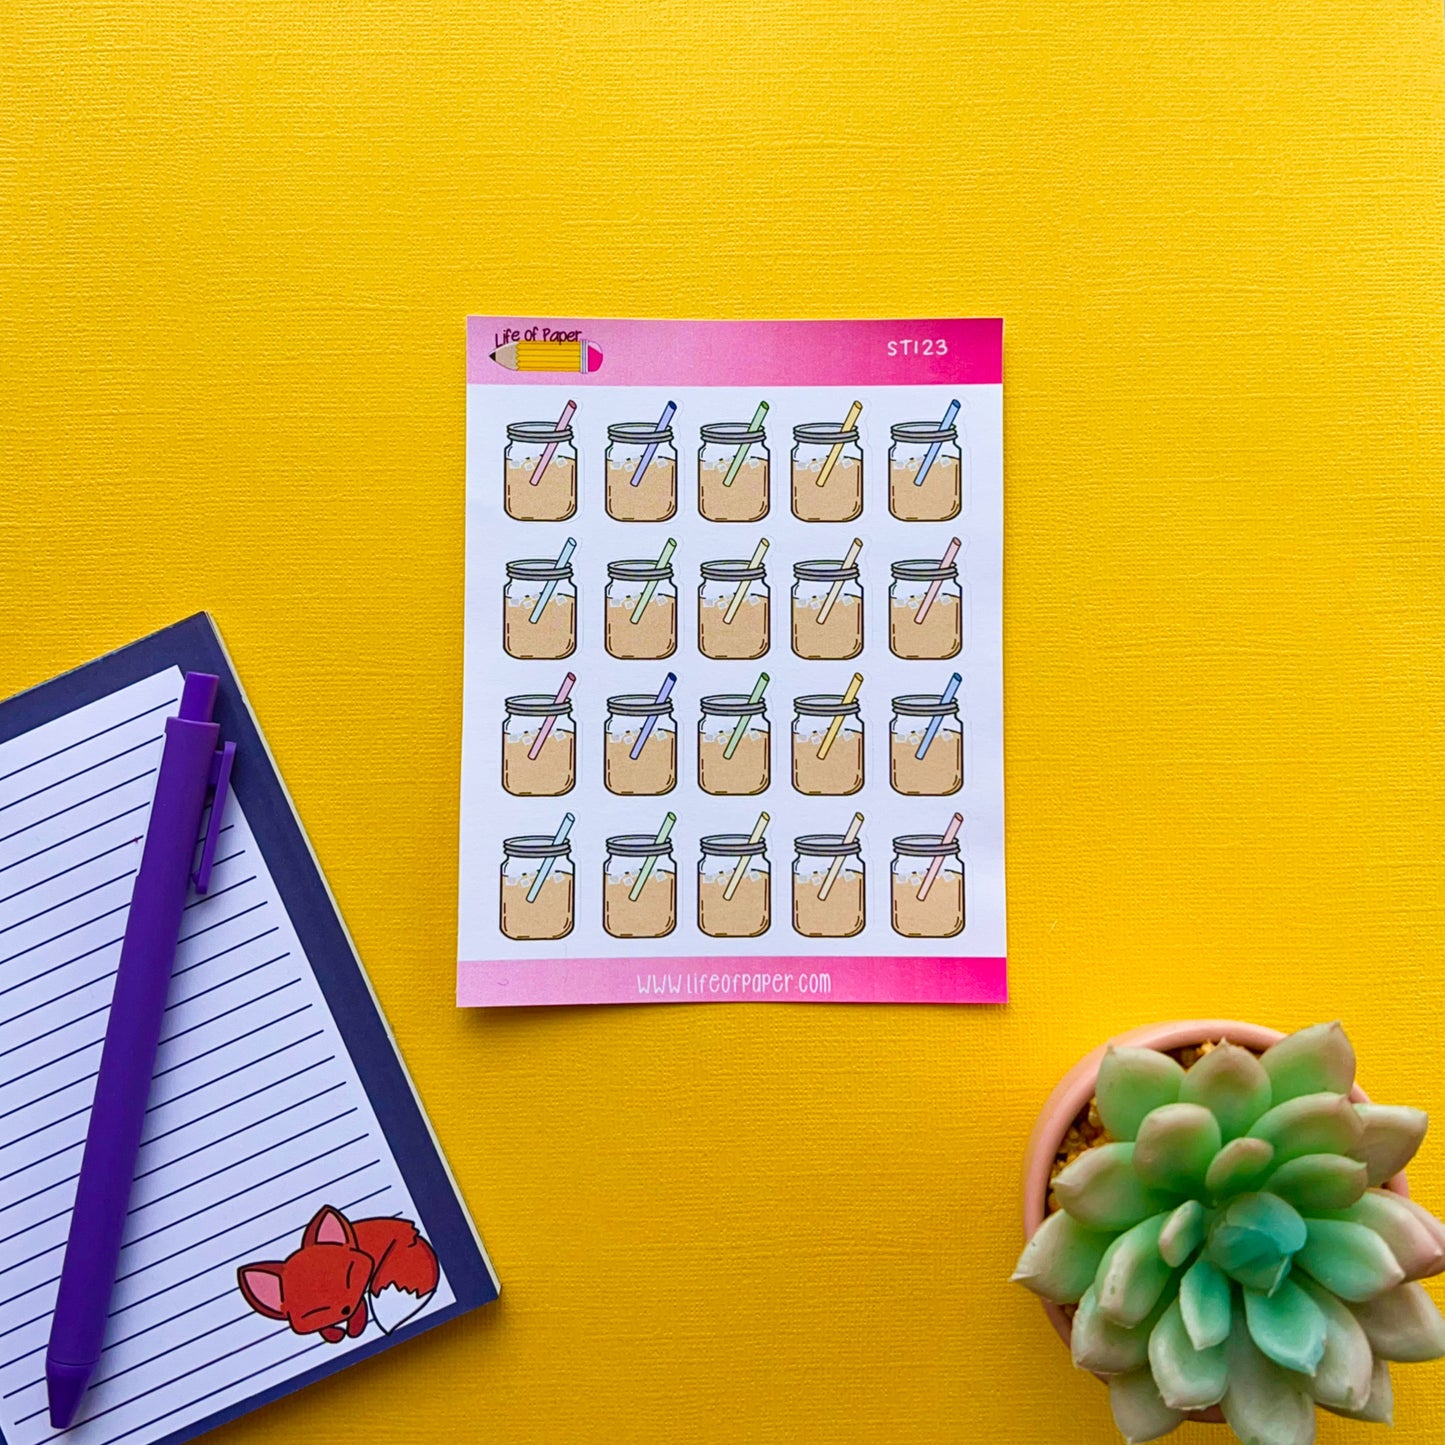 A sheet of Mason Coffee Jar Planner Stickers is displayed on a bright yellow background. To the left, there is a blue notebook with lined paper and a fox illustration, and a purple pen. On the bottom right, there's a green succulent plant.